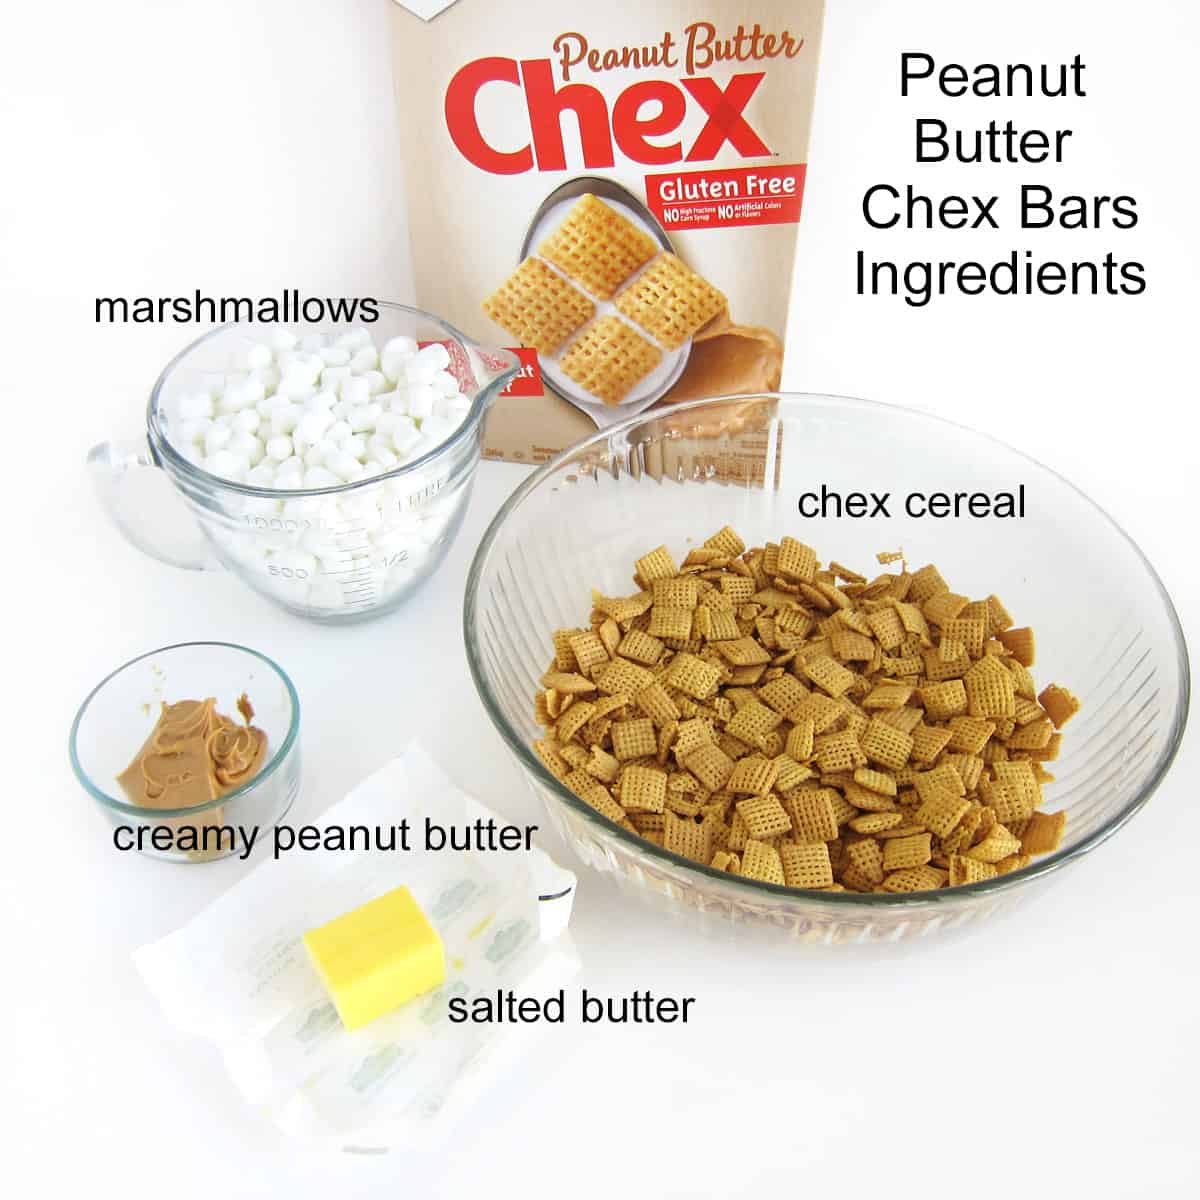 Chex Bars ingredients including Peanut Butter Chex cereal, marshmallows, butter, and peanut butter